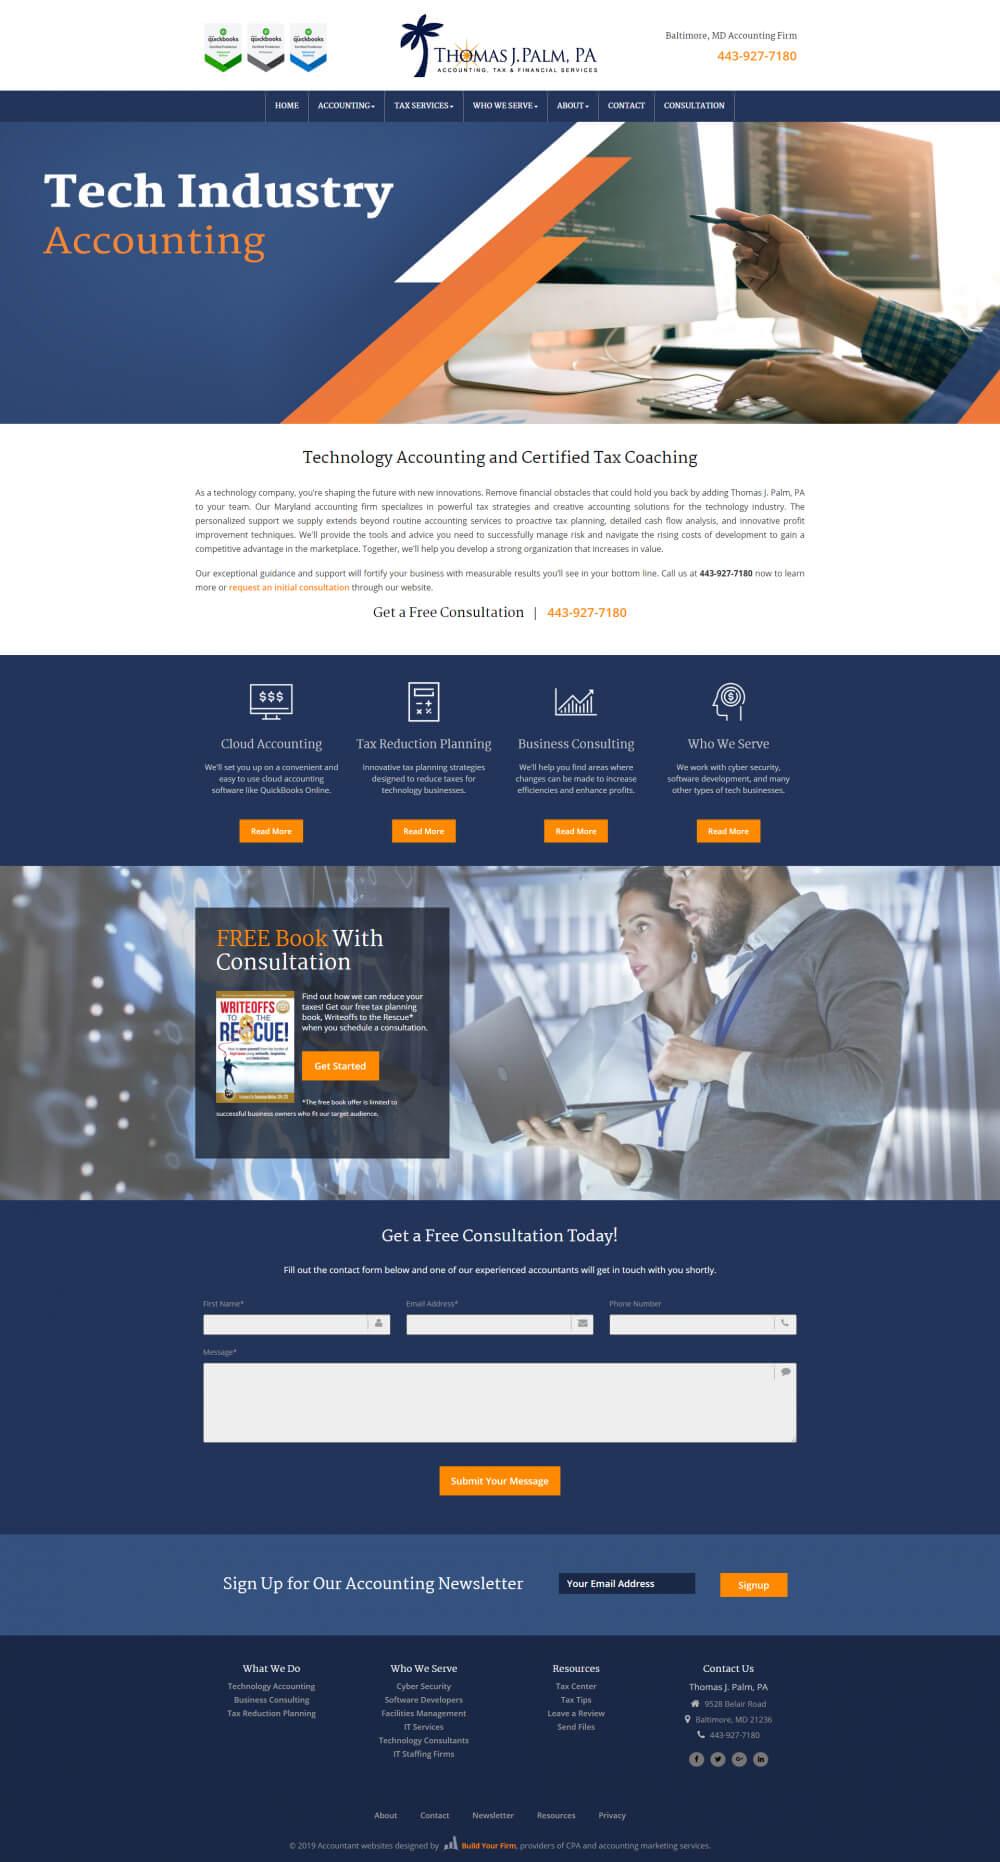 Websites for Technology Accounting